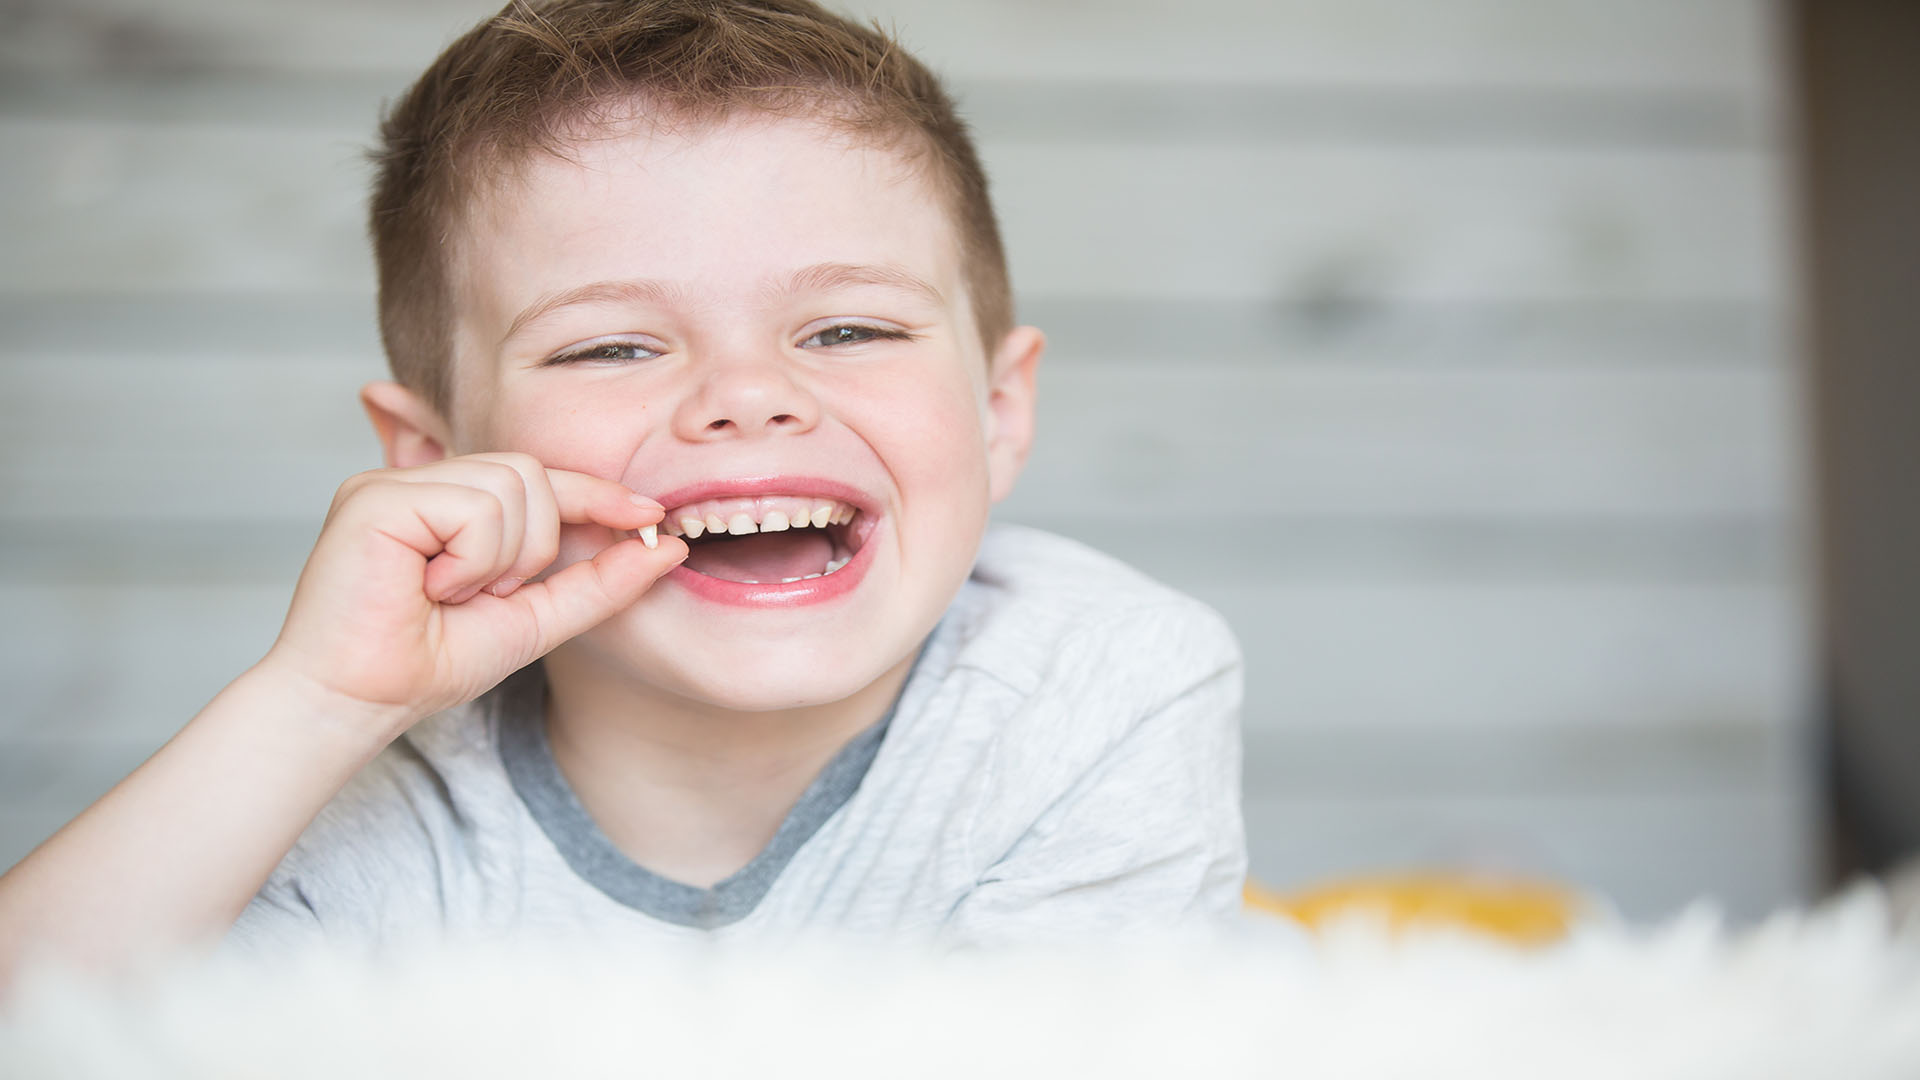 young boy smiling and holding his tooth that has just fallen out